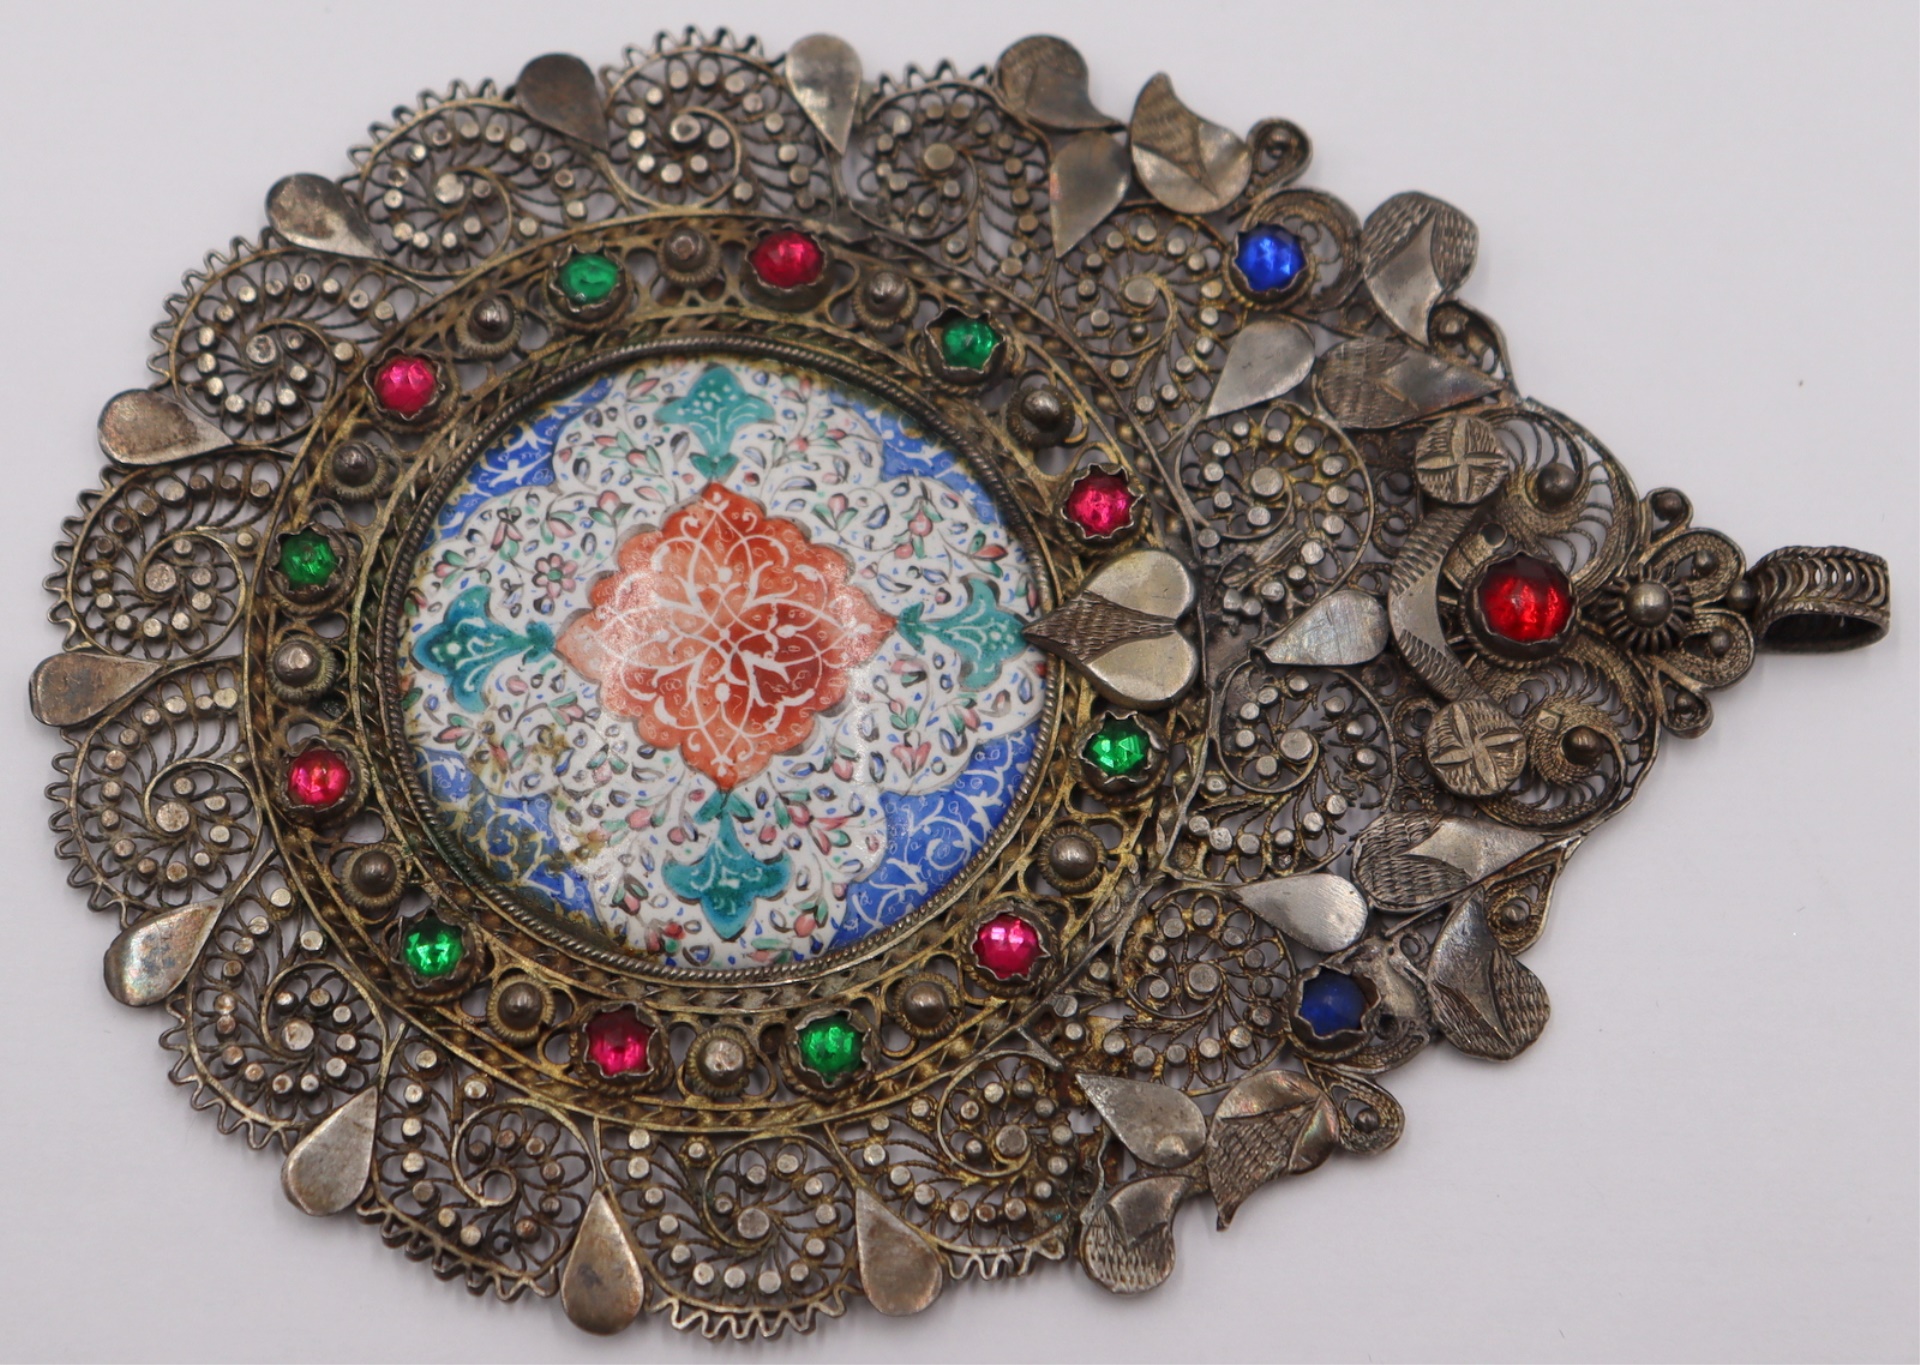 JEWELRY. PERSIAN SILVER AND ENAMEL